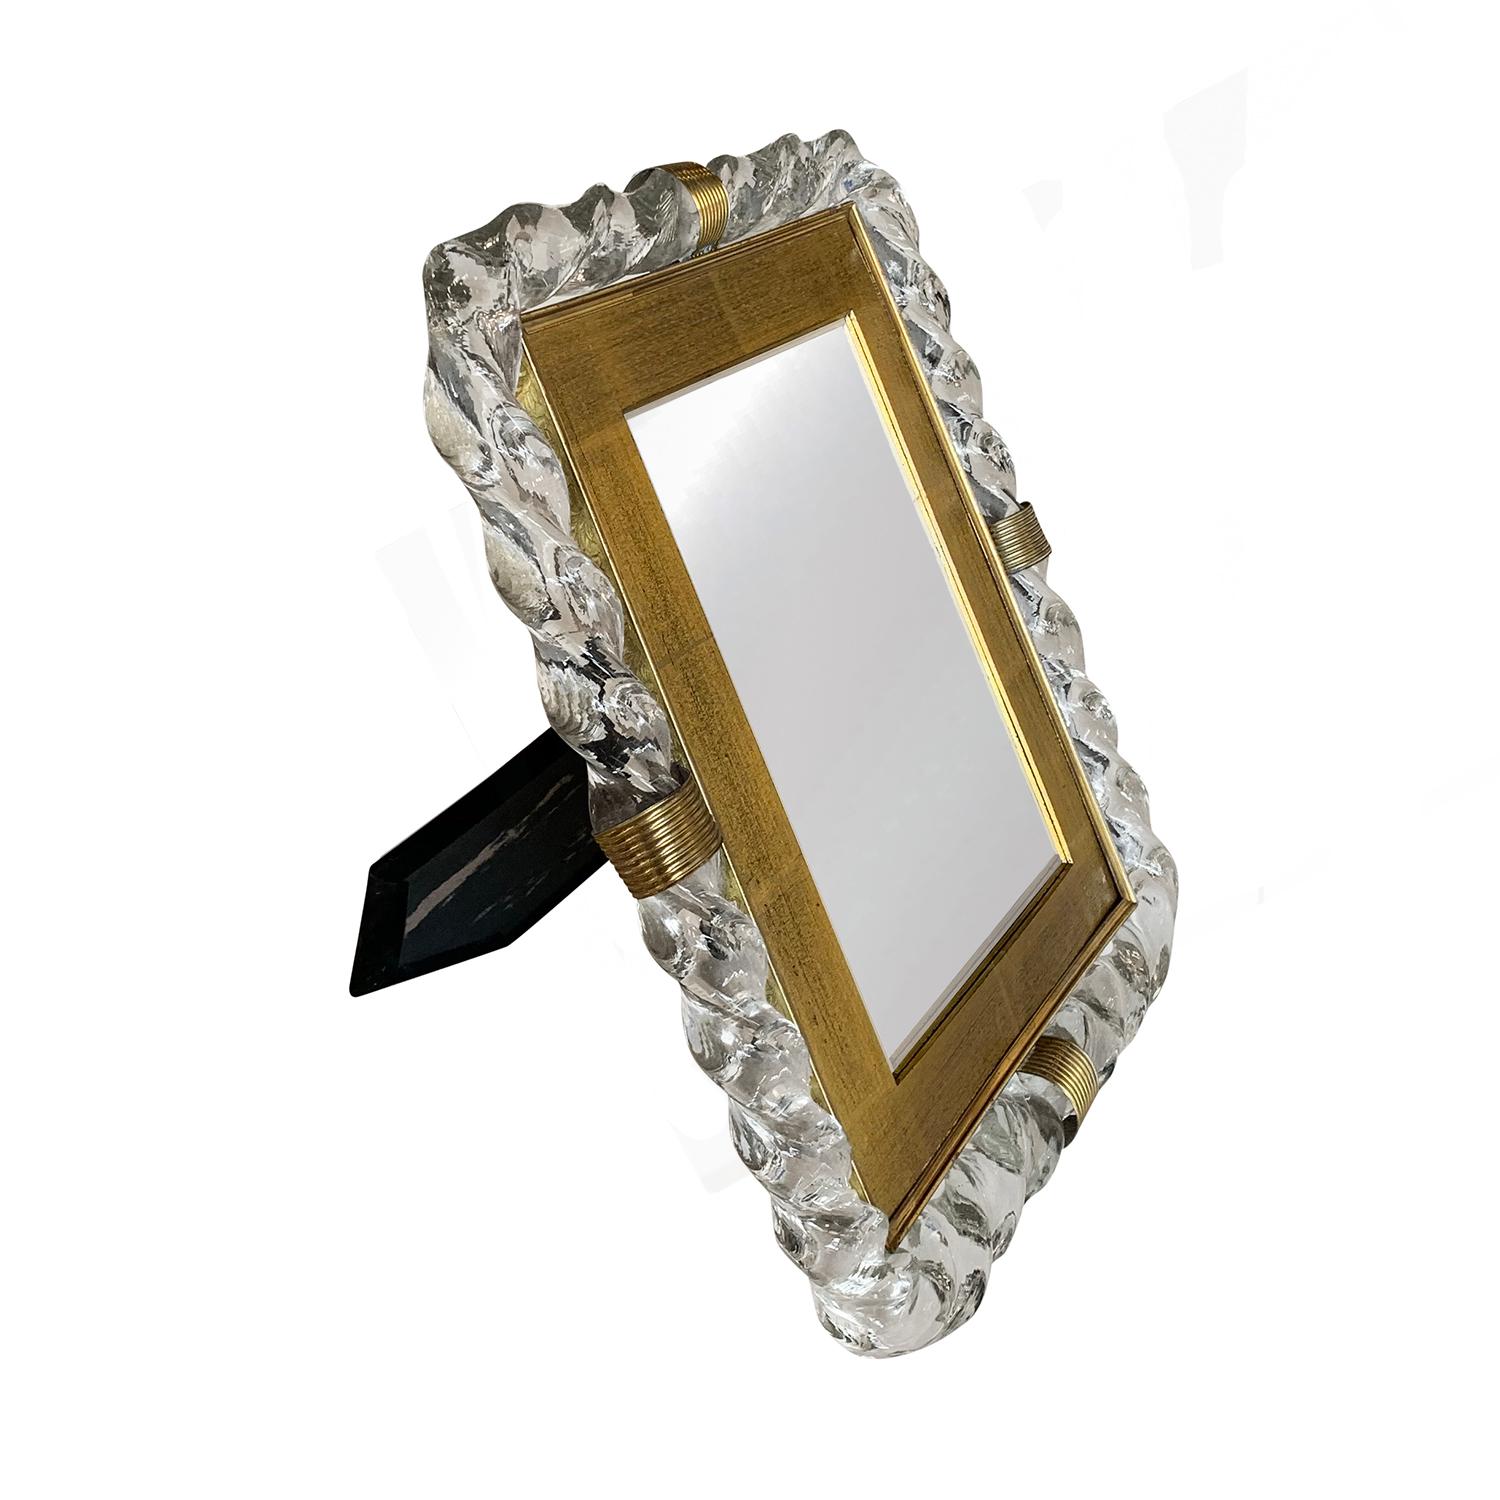 A vintage Art Deco Italian design mirror made of hand blown Murano glass with polished brass stripped rings. The table mirror is in good condition, produced by Seguso Vetri D’Arte. Wear consistent with age and use, circa 1925-1940 Murano, Italy.